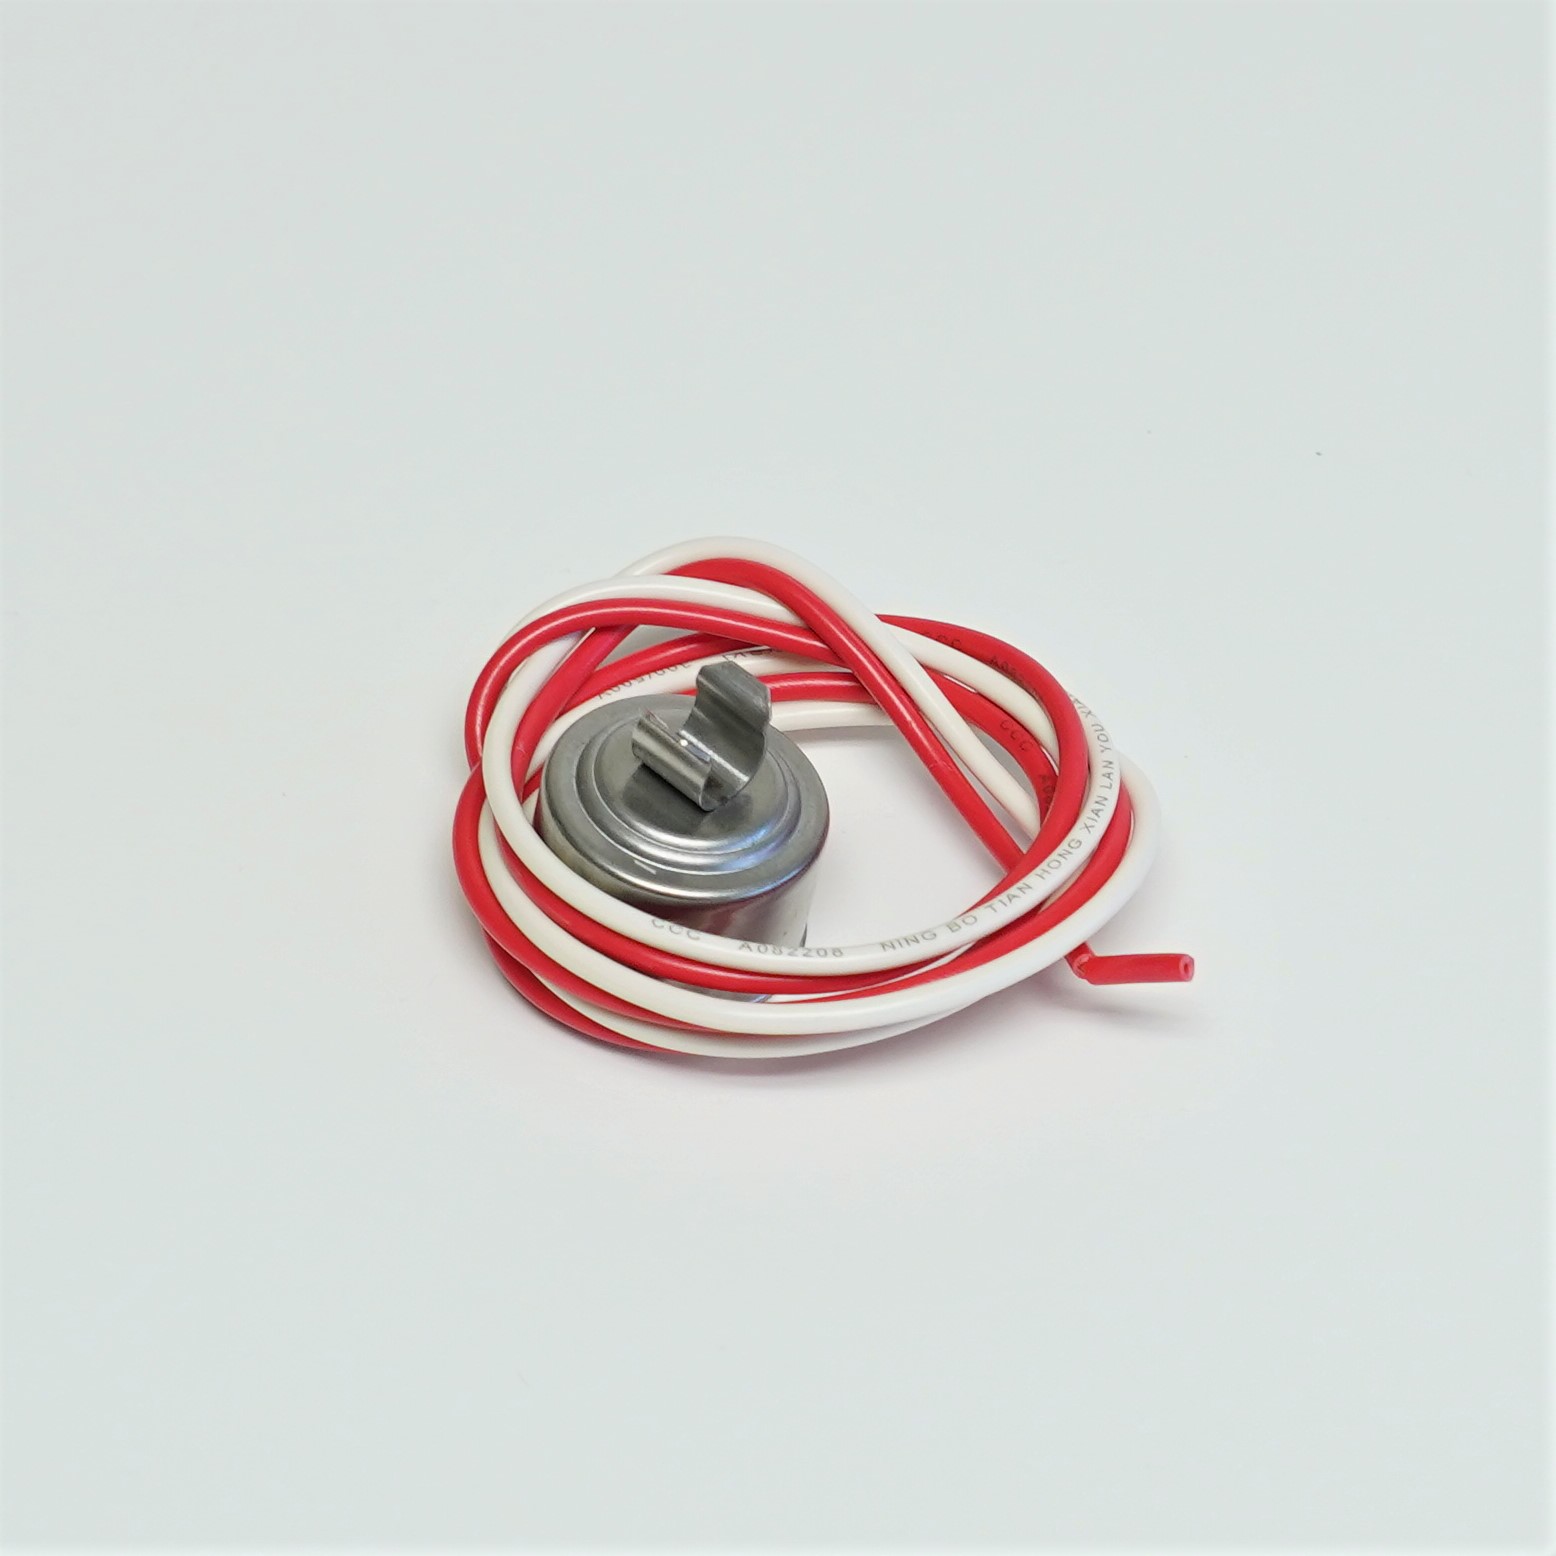 DEFROST THERMOSTAT BI METAL FOR WHIRLPOOL�